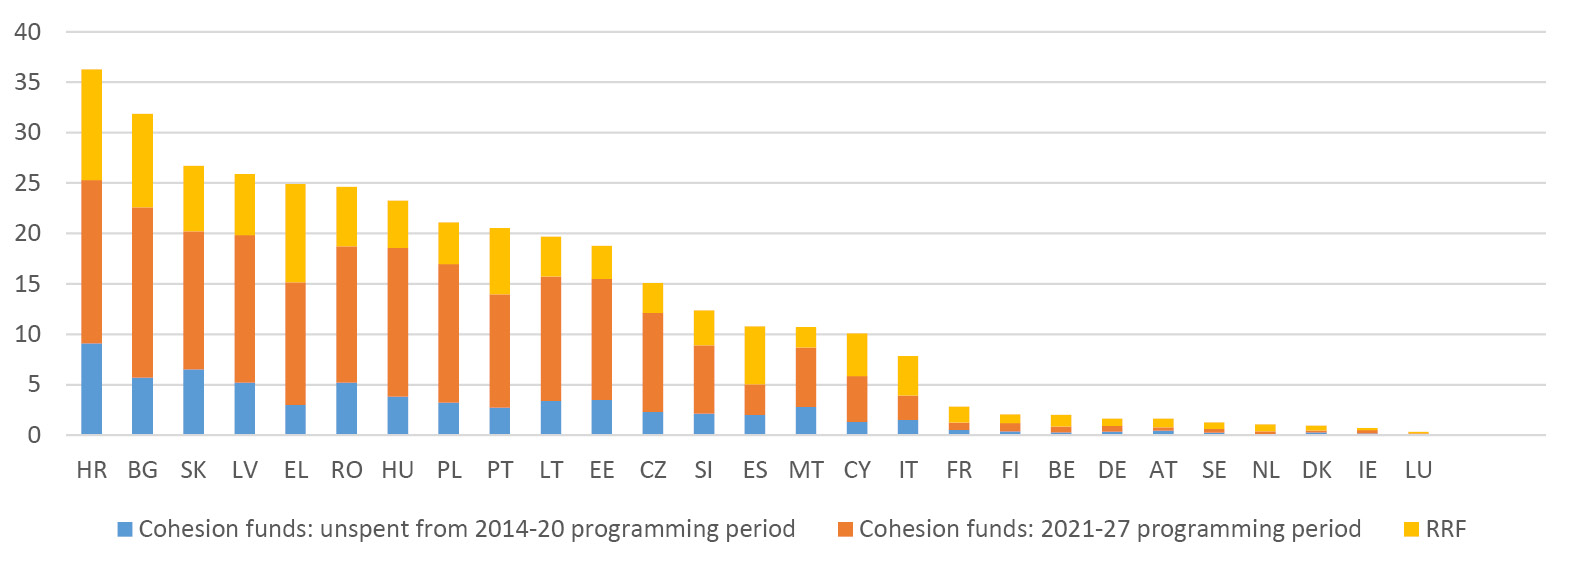 Bar graph illustrating for each EU country the component of public investment spending financed by the 2014-2020, 2021-2027 Cohesion Funds and the Recovery and Resilience Facility (RRF)